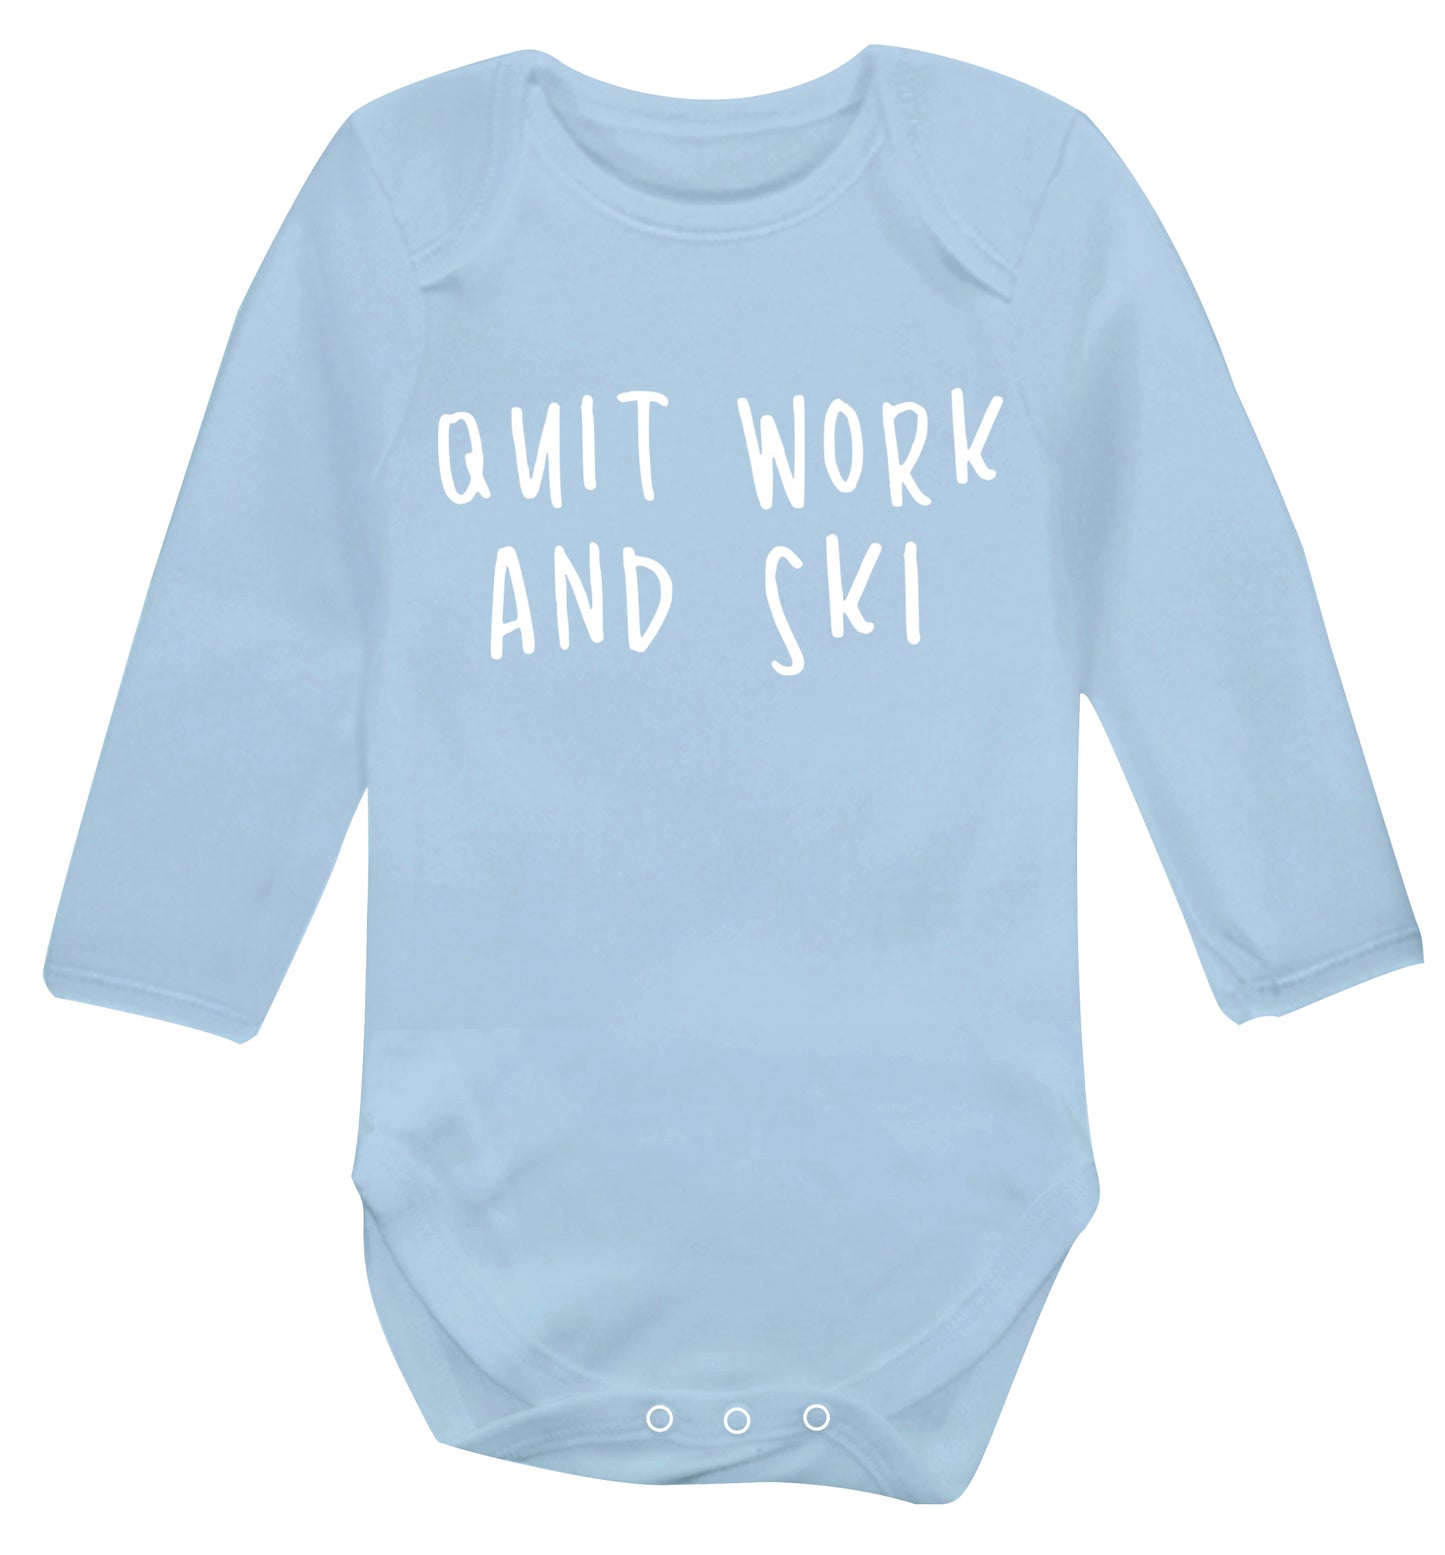 Quit work and ski Baby Vest long sleeved pale blue 6-12 months